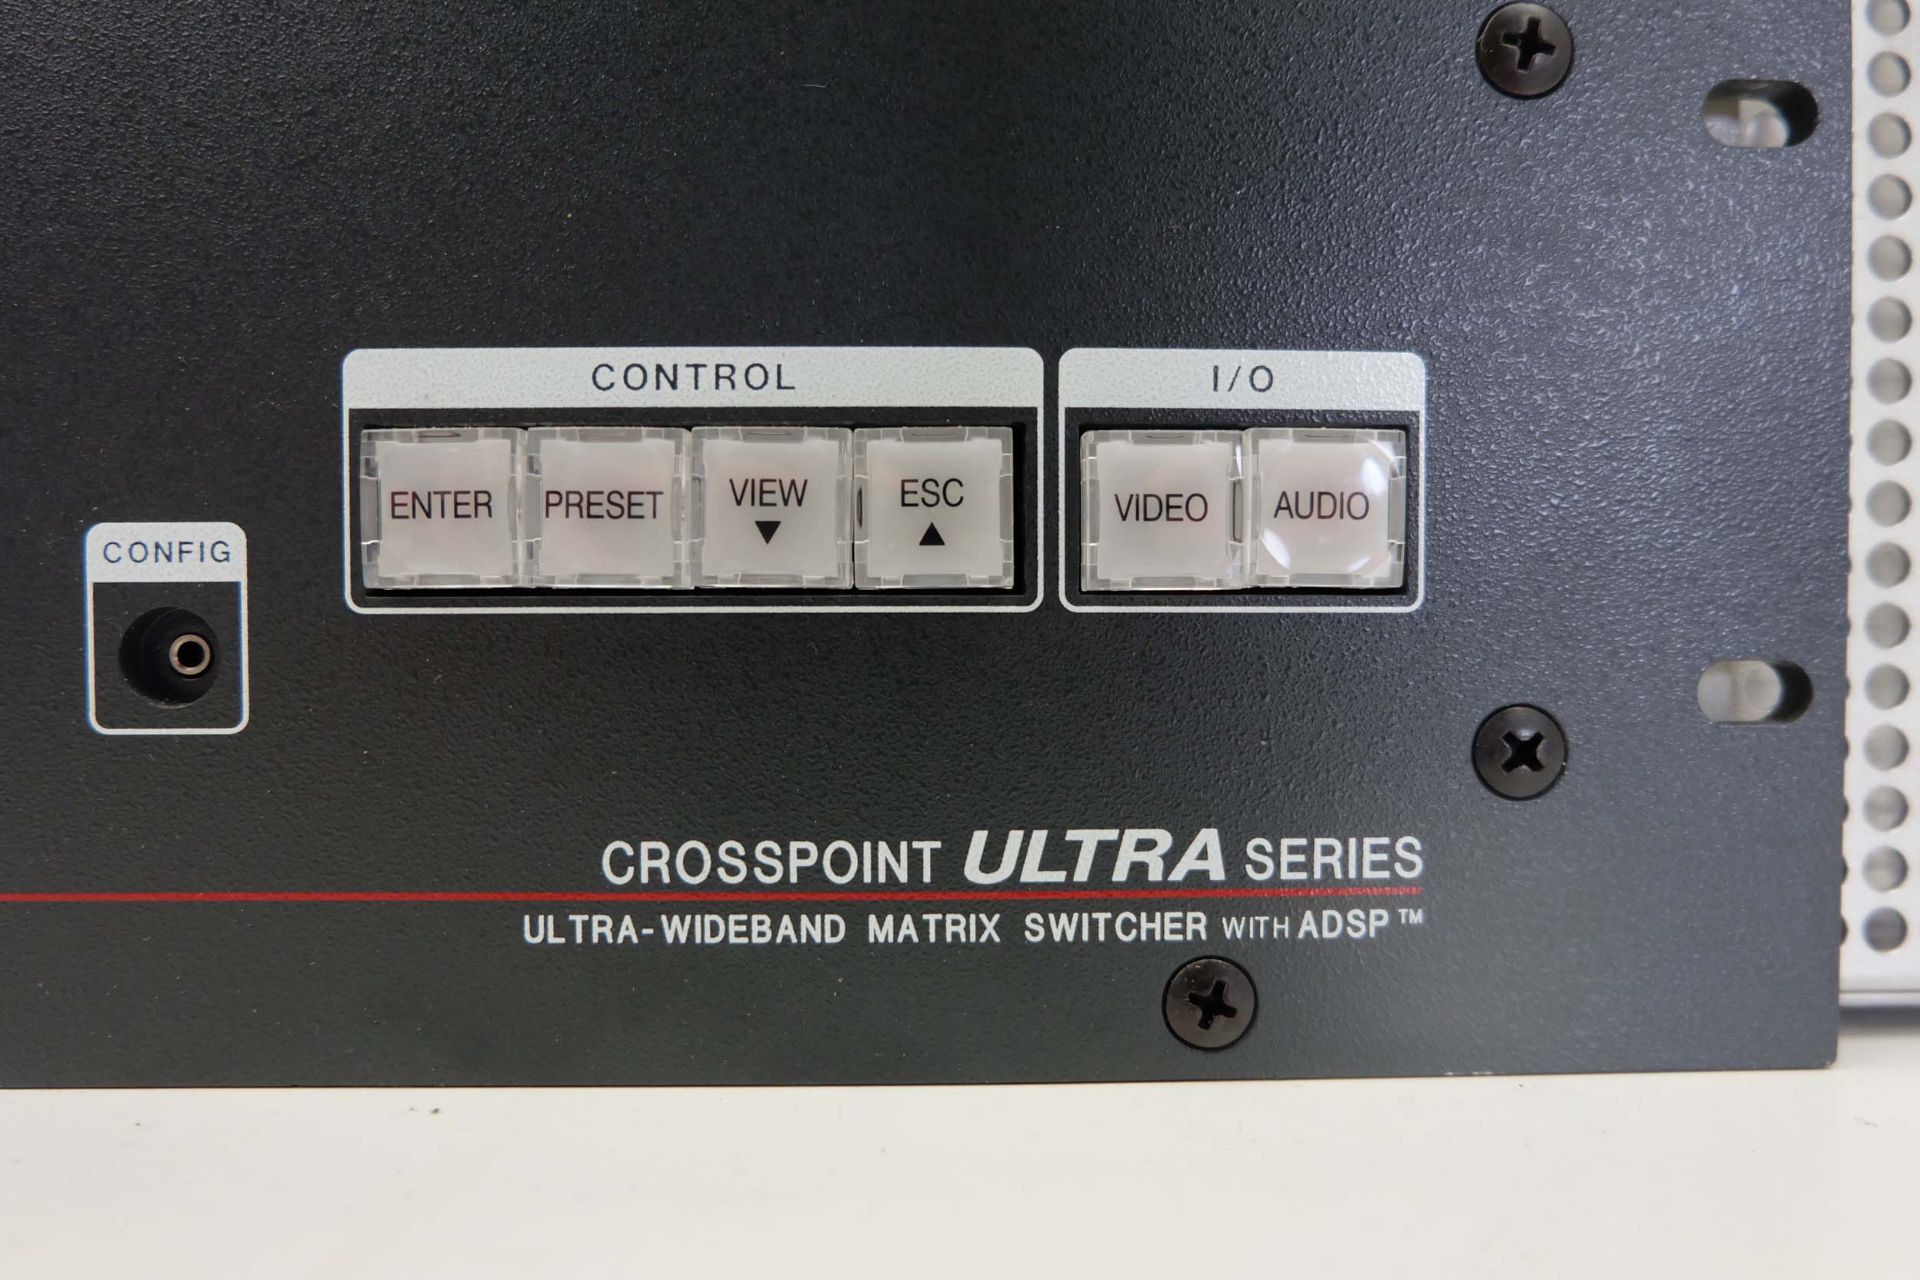 Extron Crosspoint Ultra Series Wideband Matrix Switcher With ADSP. Plus Marconi CE168 X and Accomany - Image 3 of 8